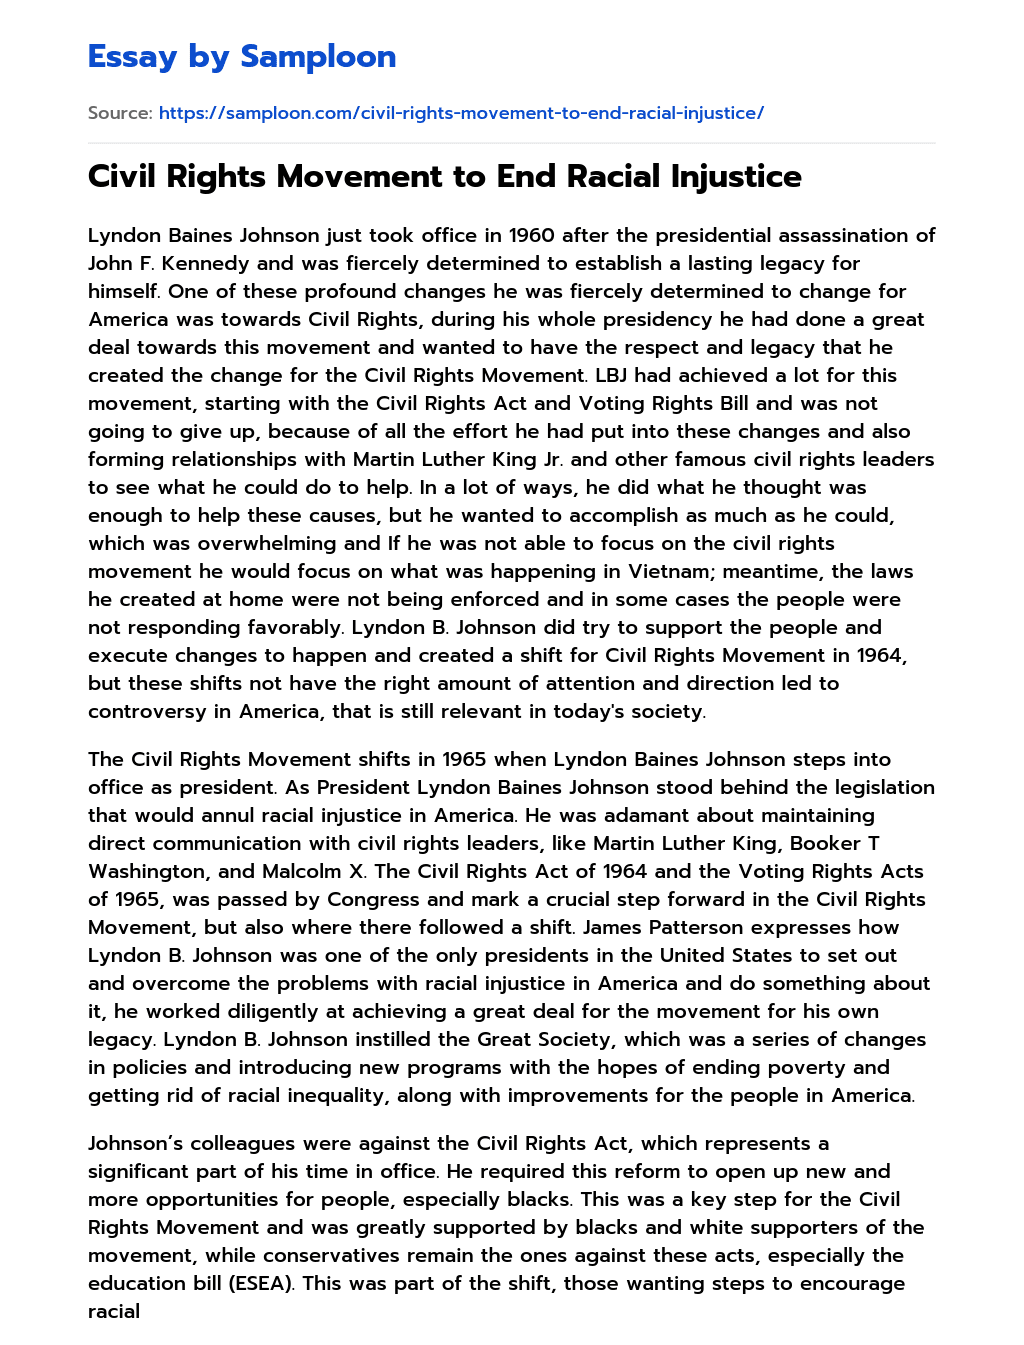 Civil Rights Movement to End Racial Injustice essay